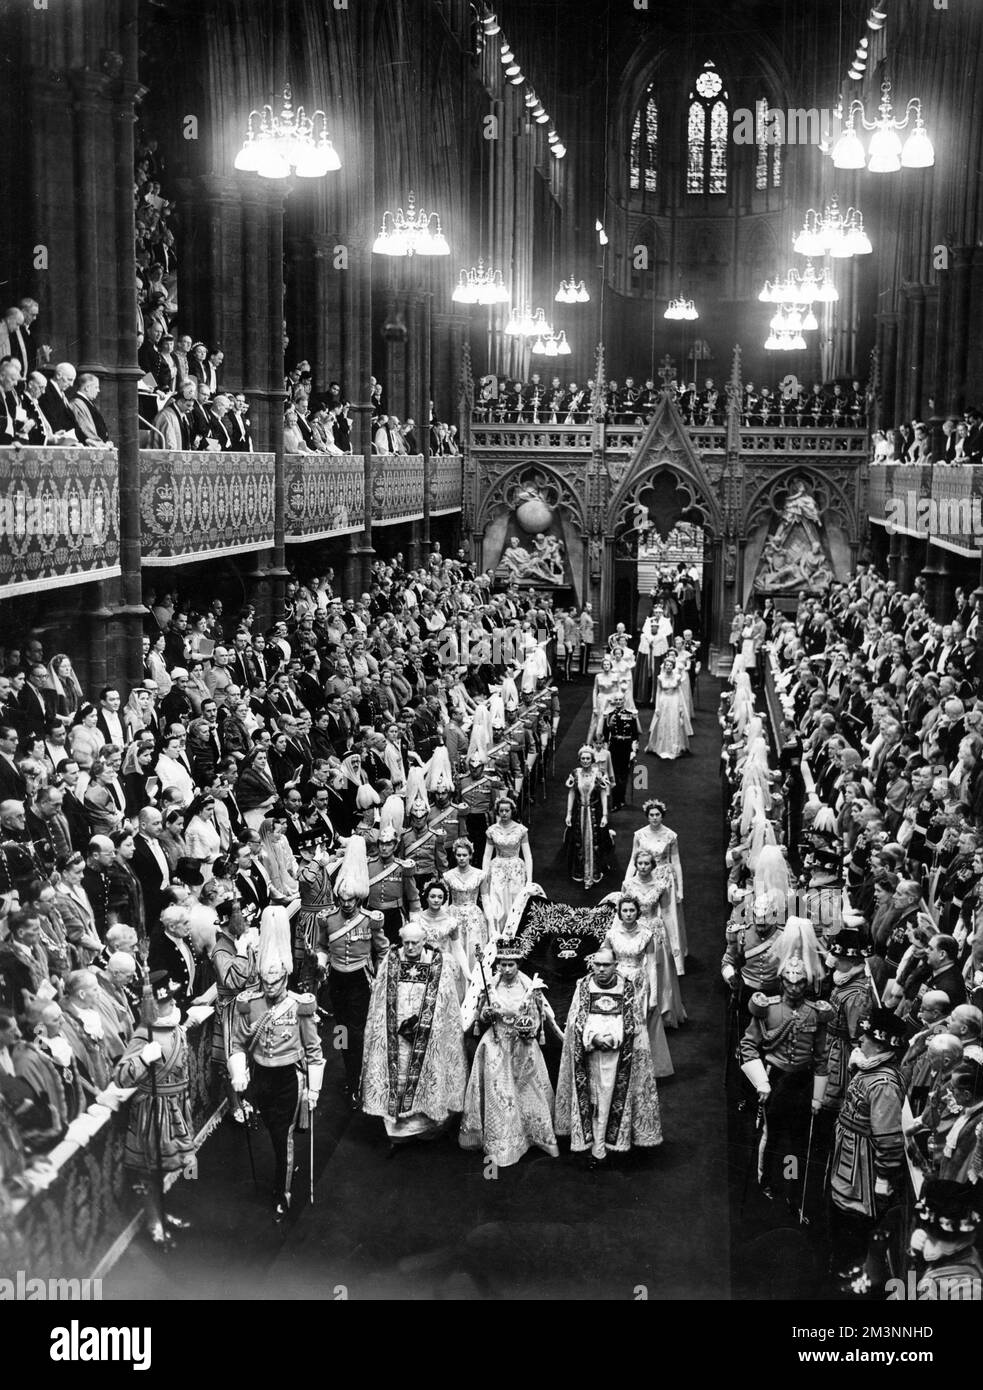 General view of the State Procession down the Nave led by H. M. The Queen, flanked by her Maids of Honour after the Coronation ceremony in Westminster Abbey on June 2nd 1953.     Date: 1953 Stock Photo